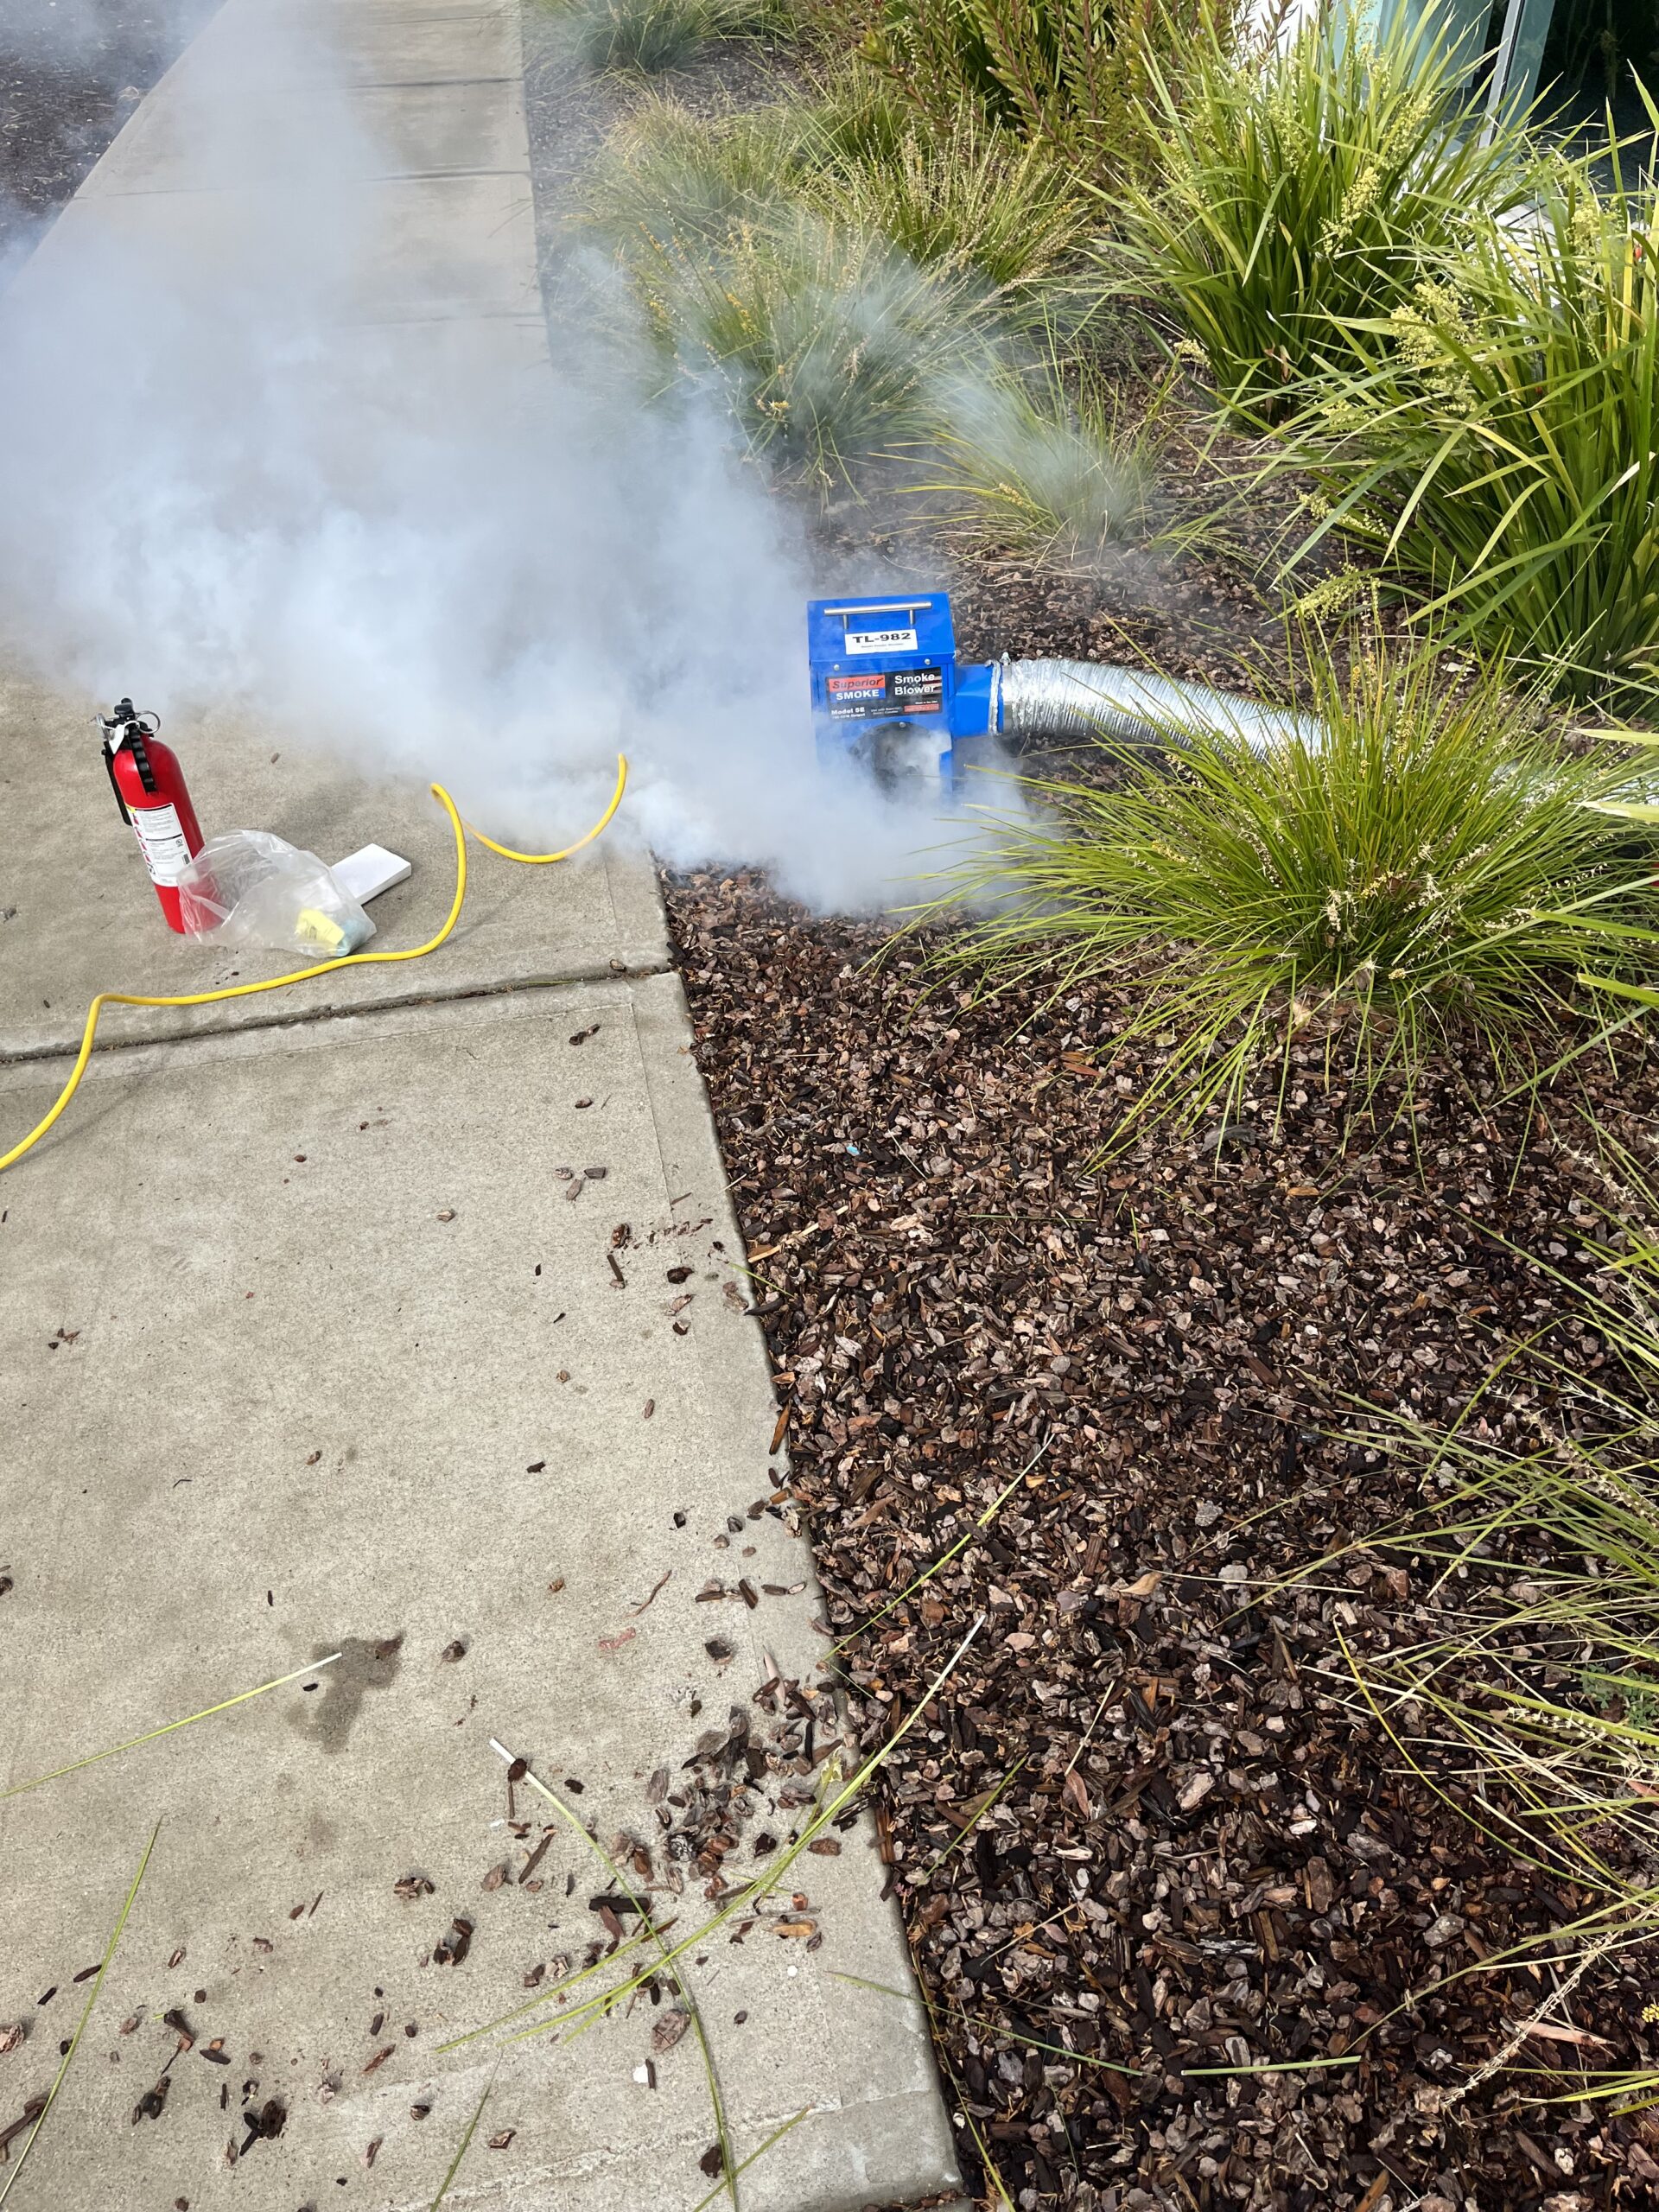 Drain Waste Vent (DWV) System Smoke Tests for Commercial Plumbing Systems LIGHTING | ELECTRICAL | PLUMBING | MECHANICAL Northern California | Sacramento |  Auburn |  San Francisco | Bay Area | Reno